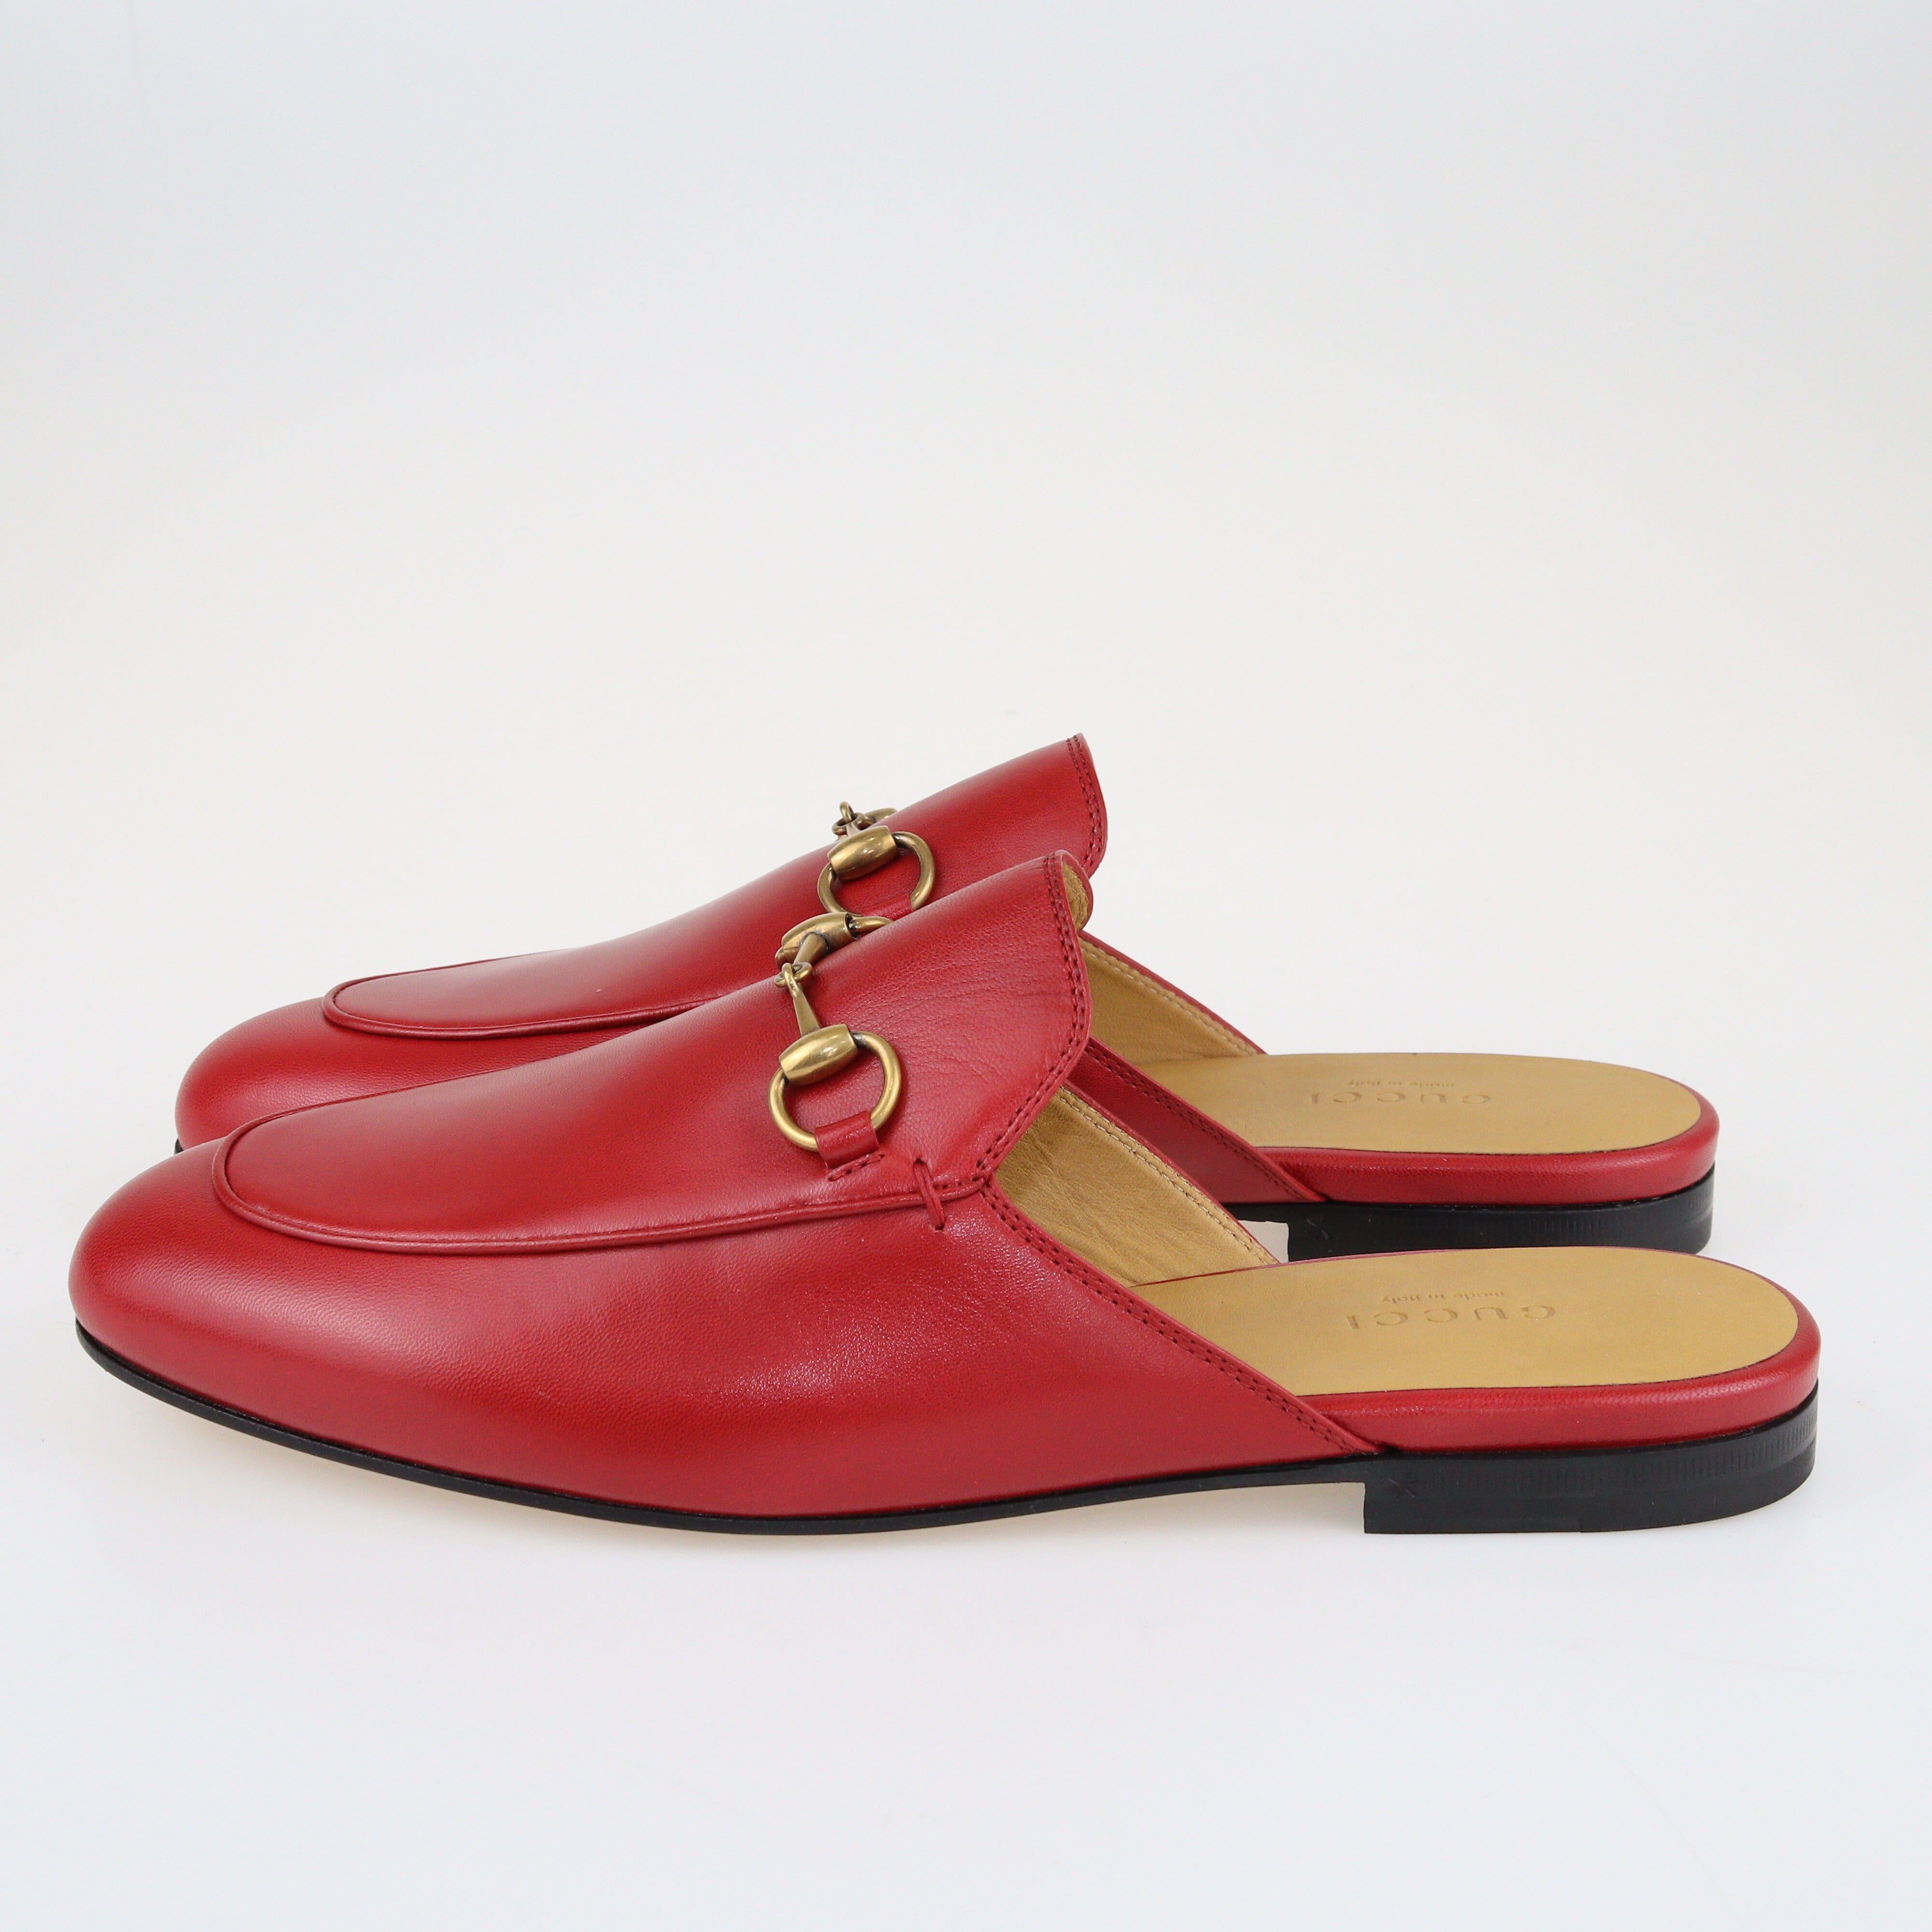 Red Princetown Horsebit Mules Shoes Gucci 